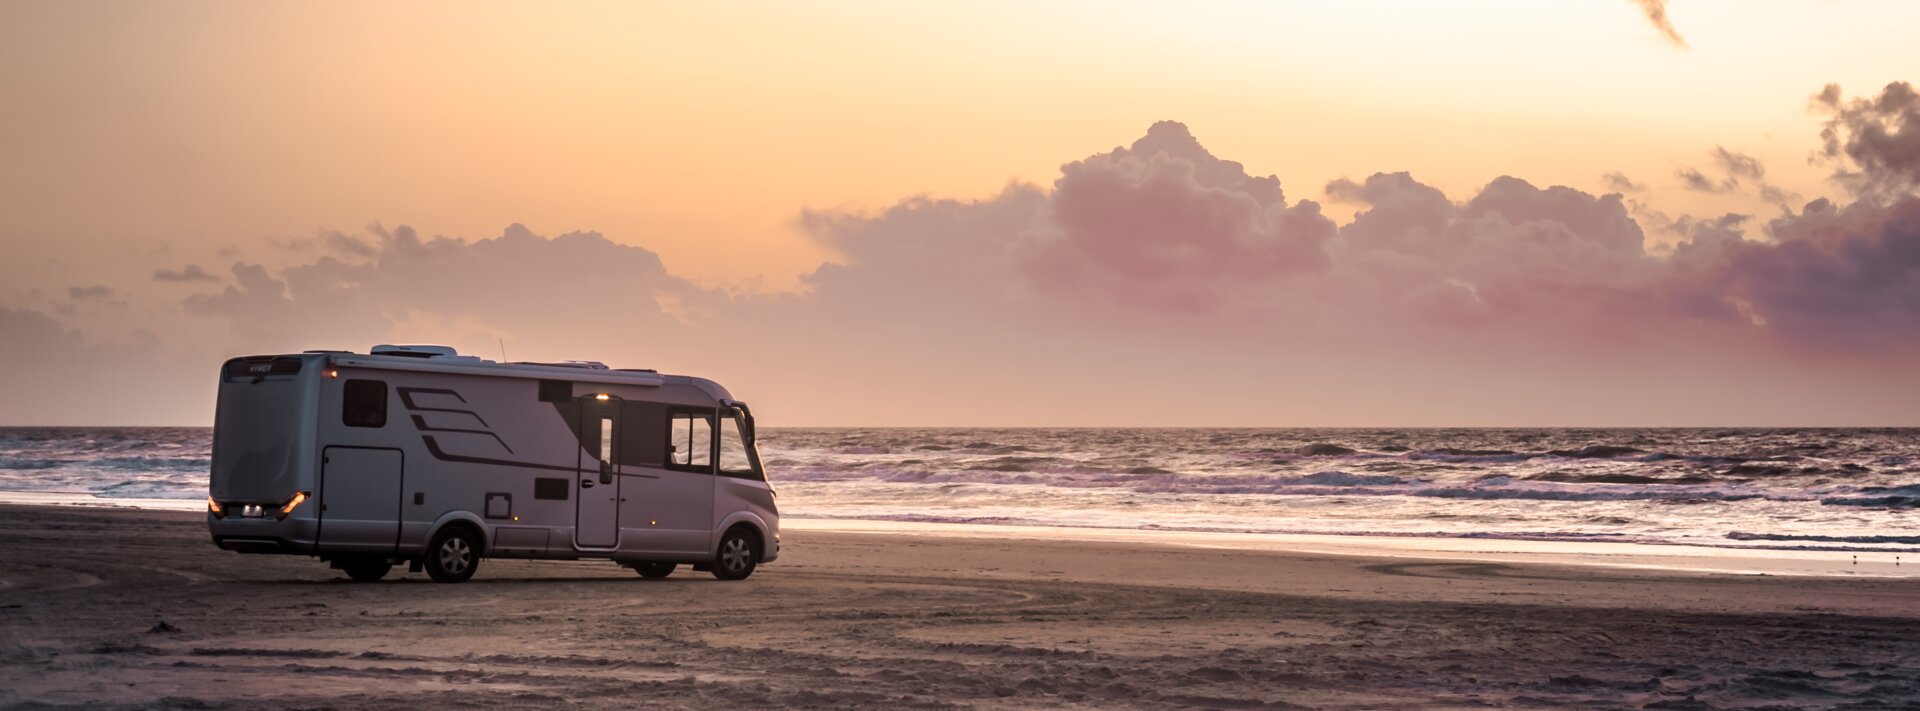 HYMER B-Class MasterLine I by the sea on a sandy beach with sunset